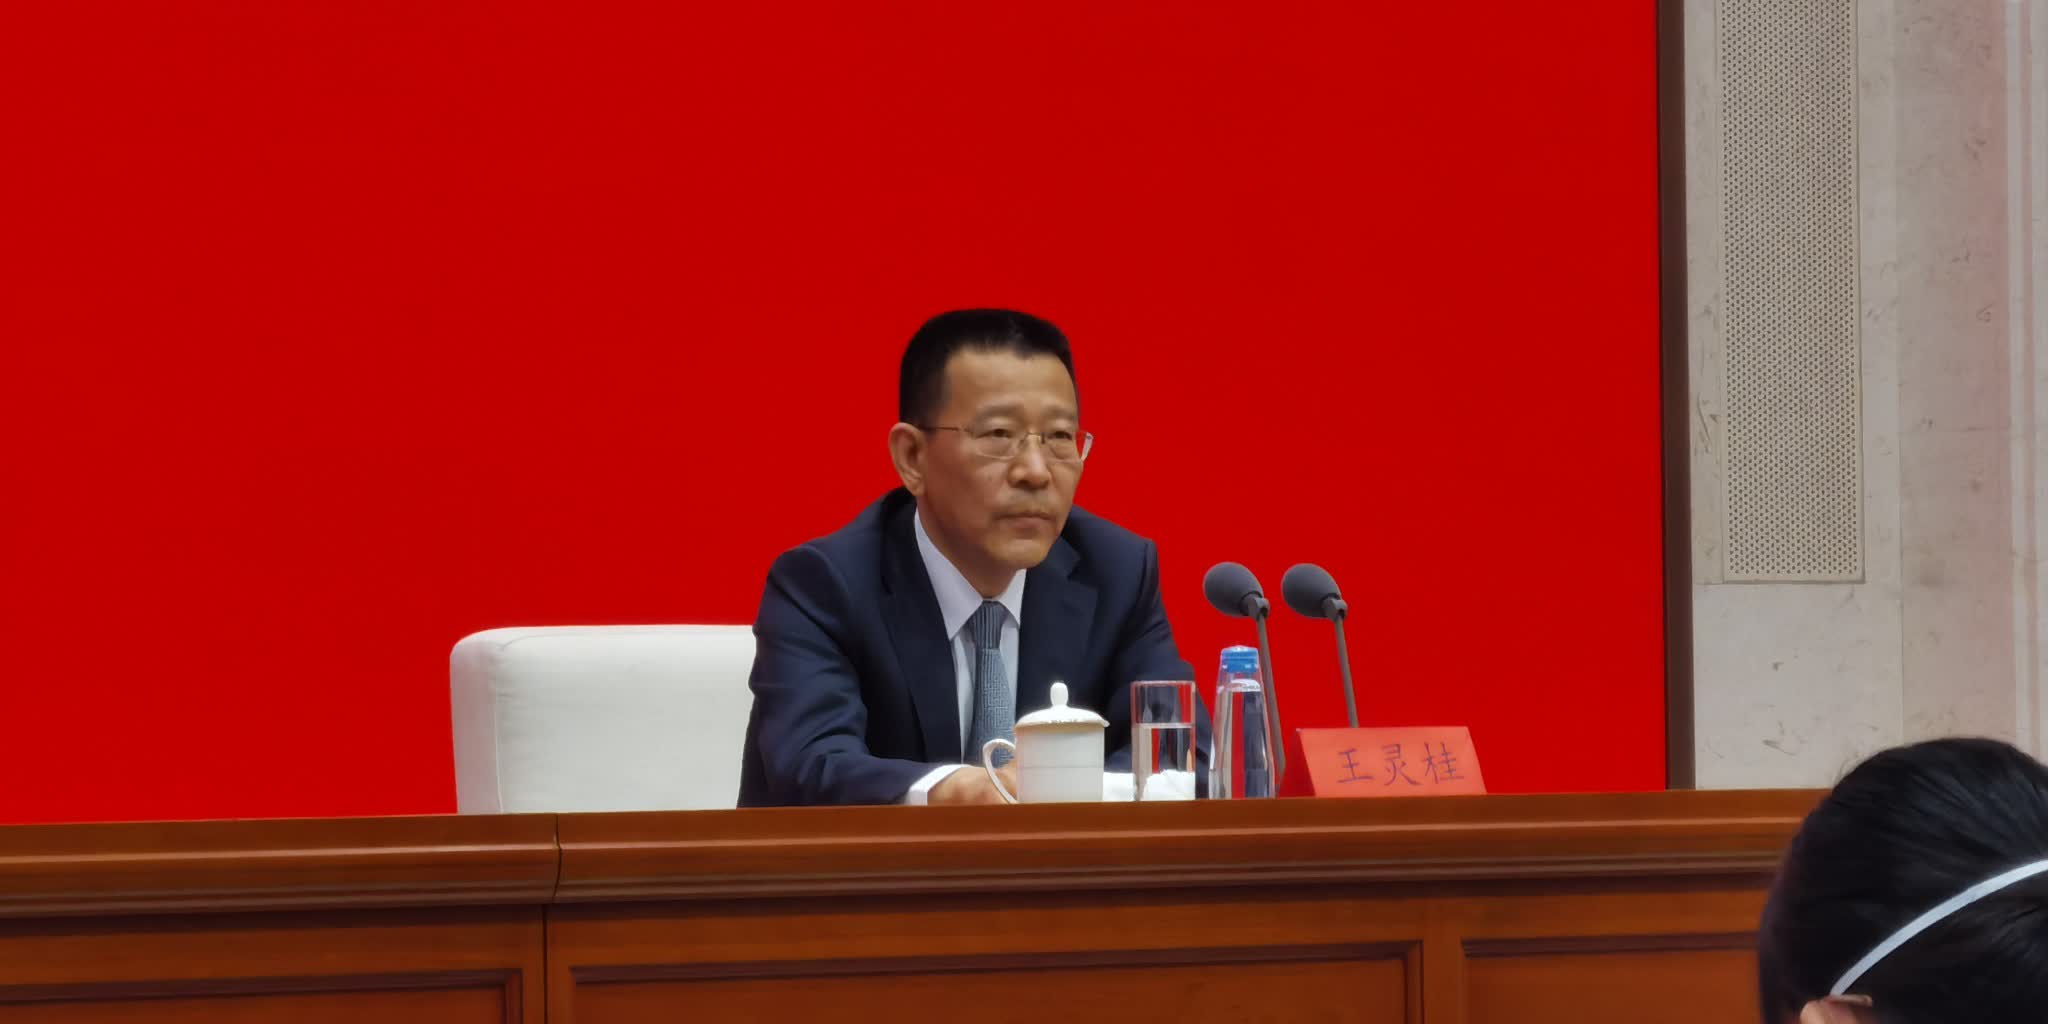 Wang Linggui: Central government respects high degree of autonomy of HK